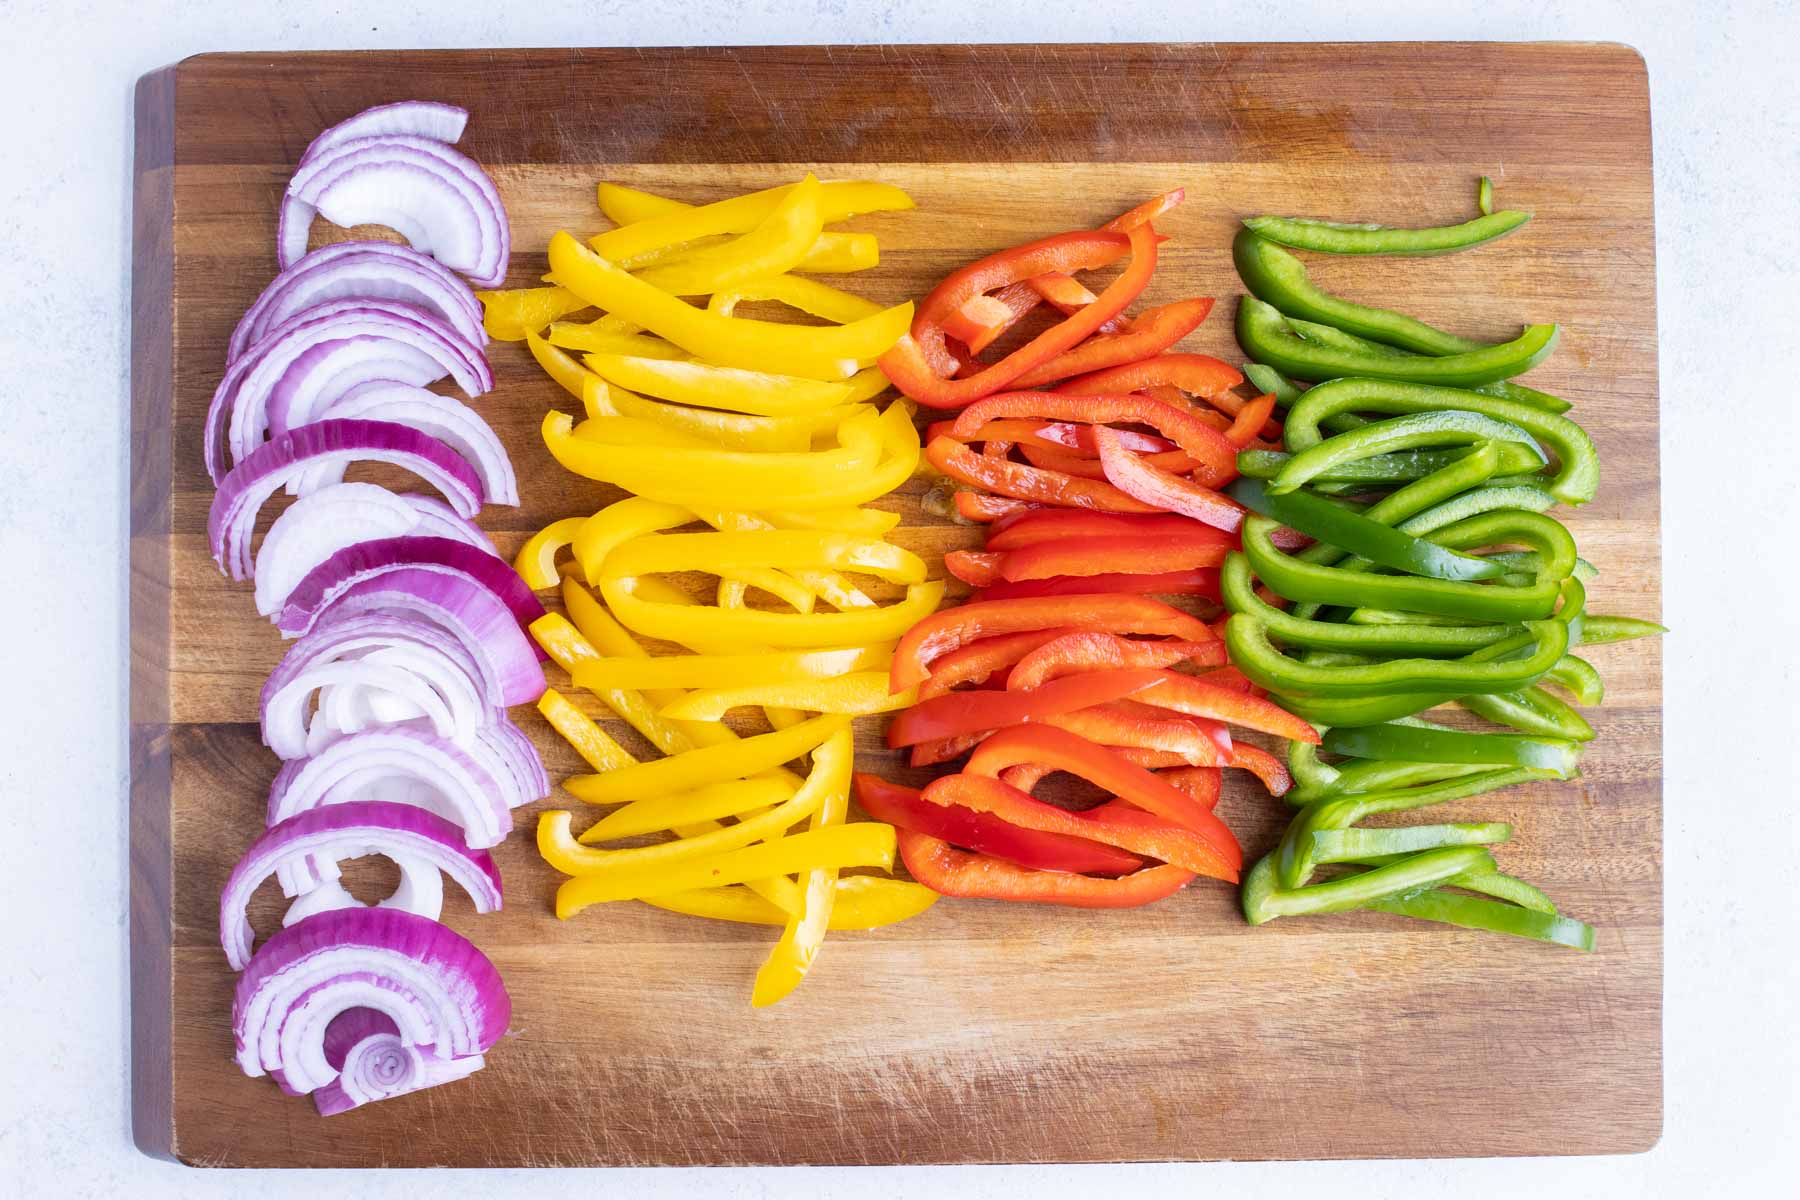 Red onions are cut into strips just like bell peppers.